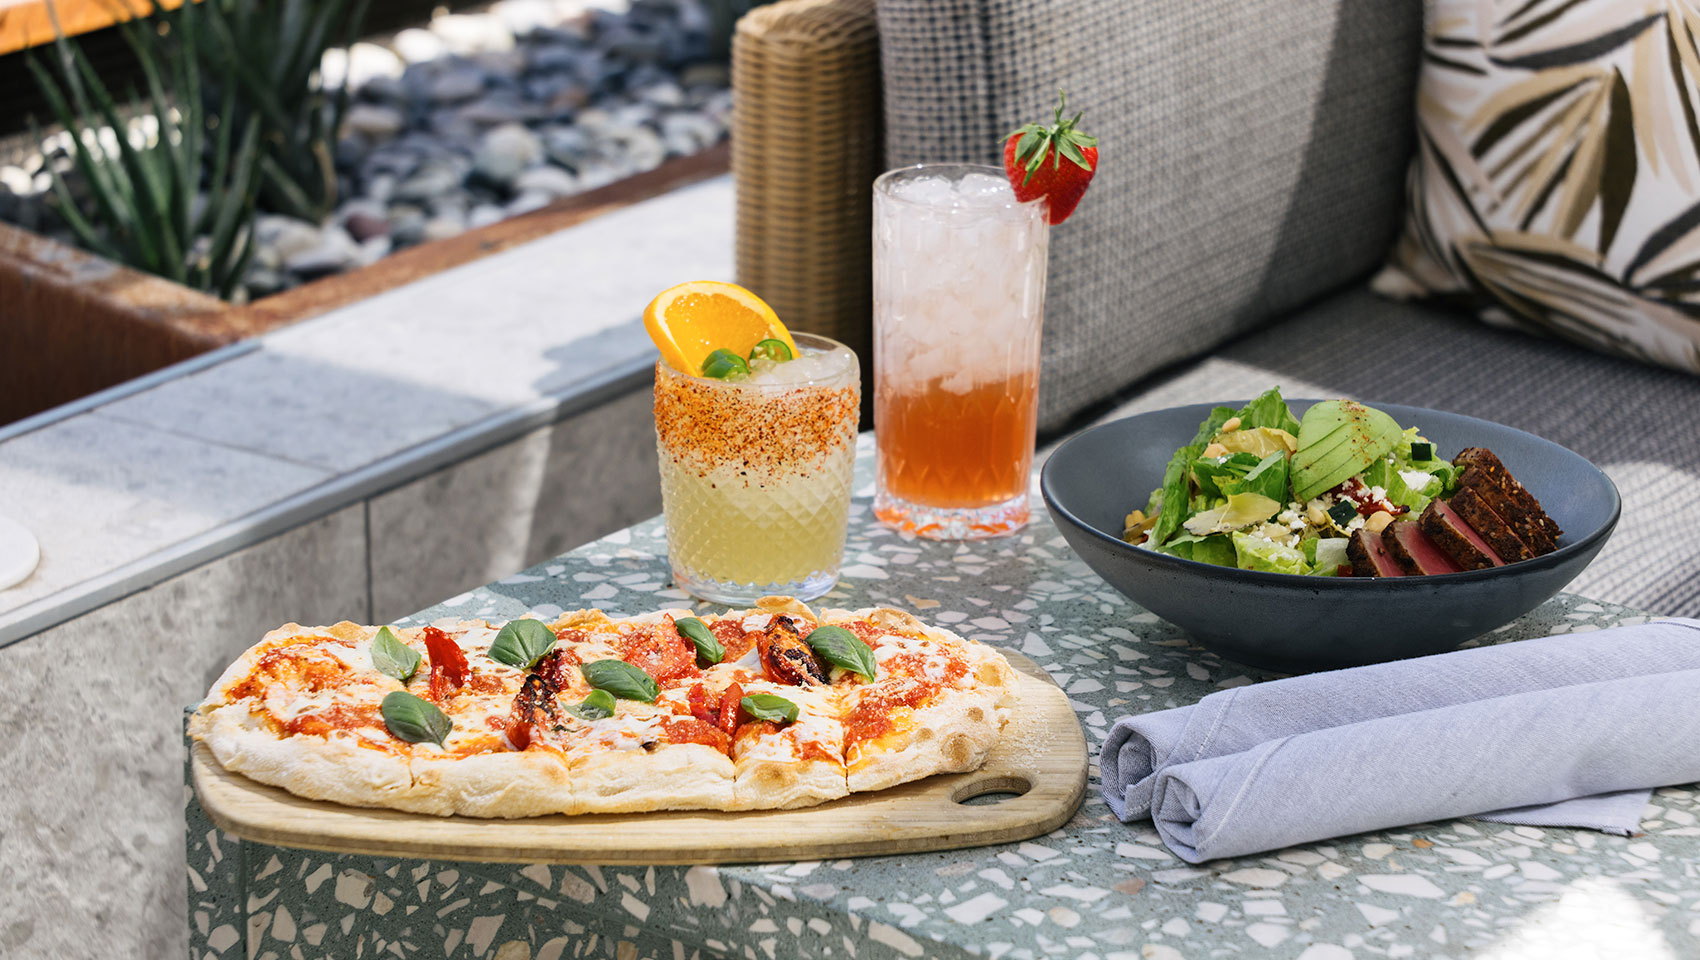 Eden Rooftop Bar pizza with salad and drinks